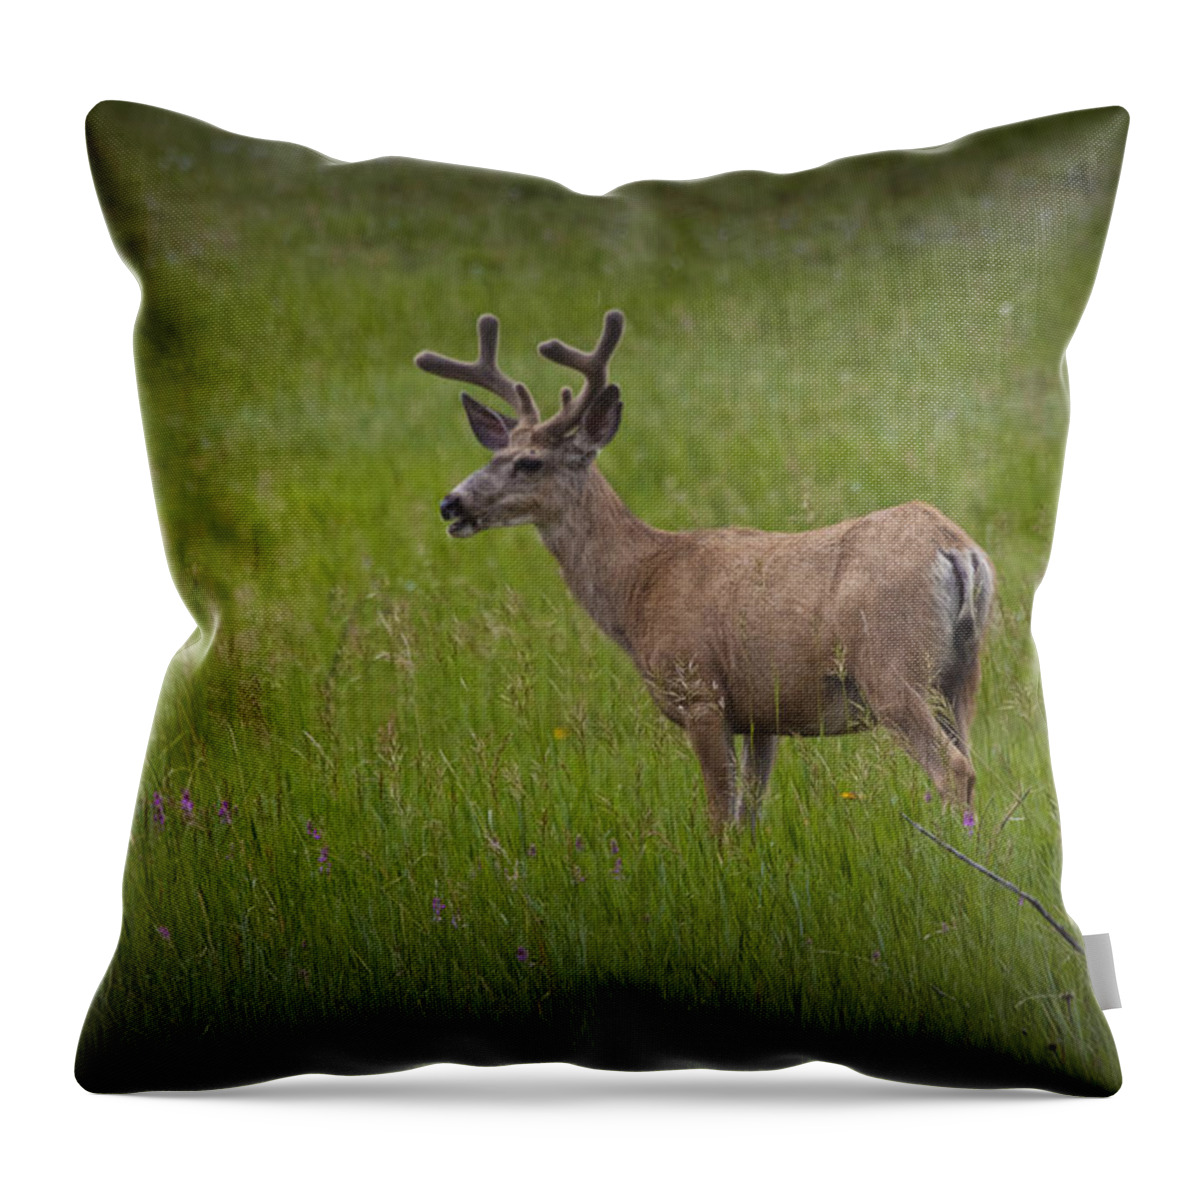 Deer Throw Pillow featuring the photograph Mule Deer with Velvet Antlers No. 1097 by Randall Nyhof